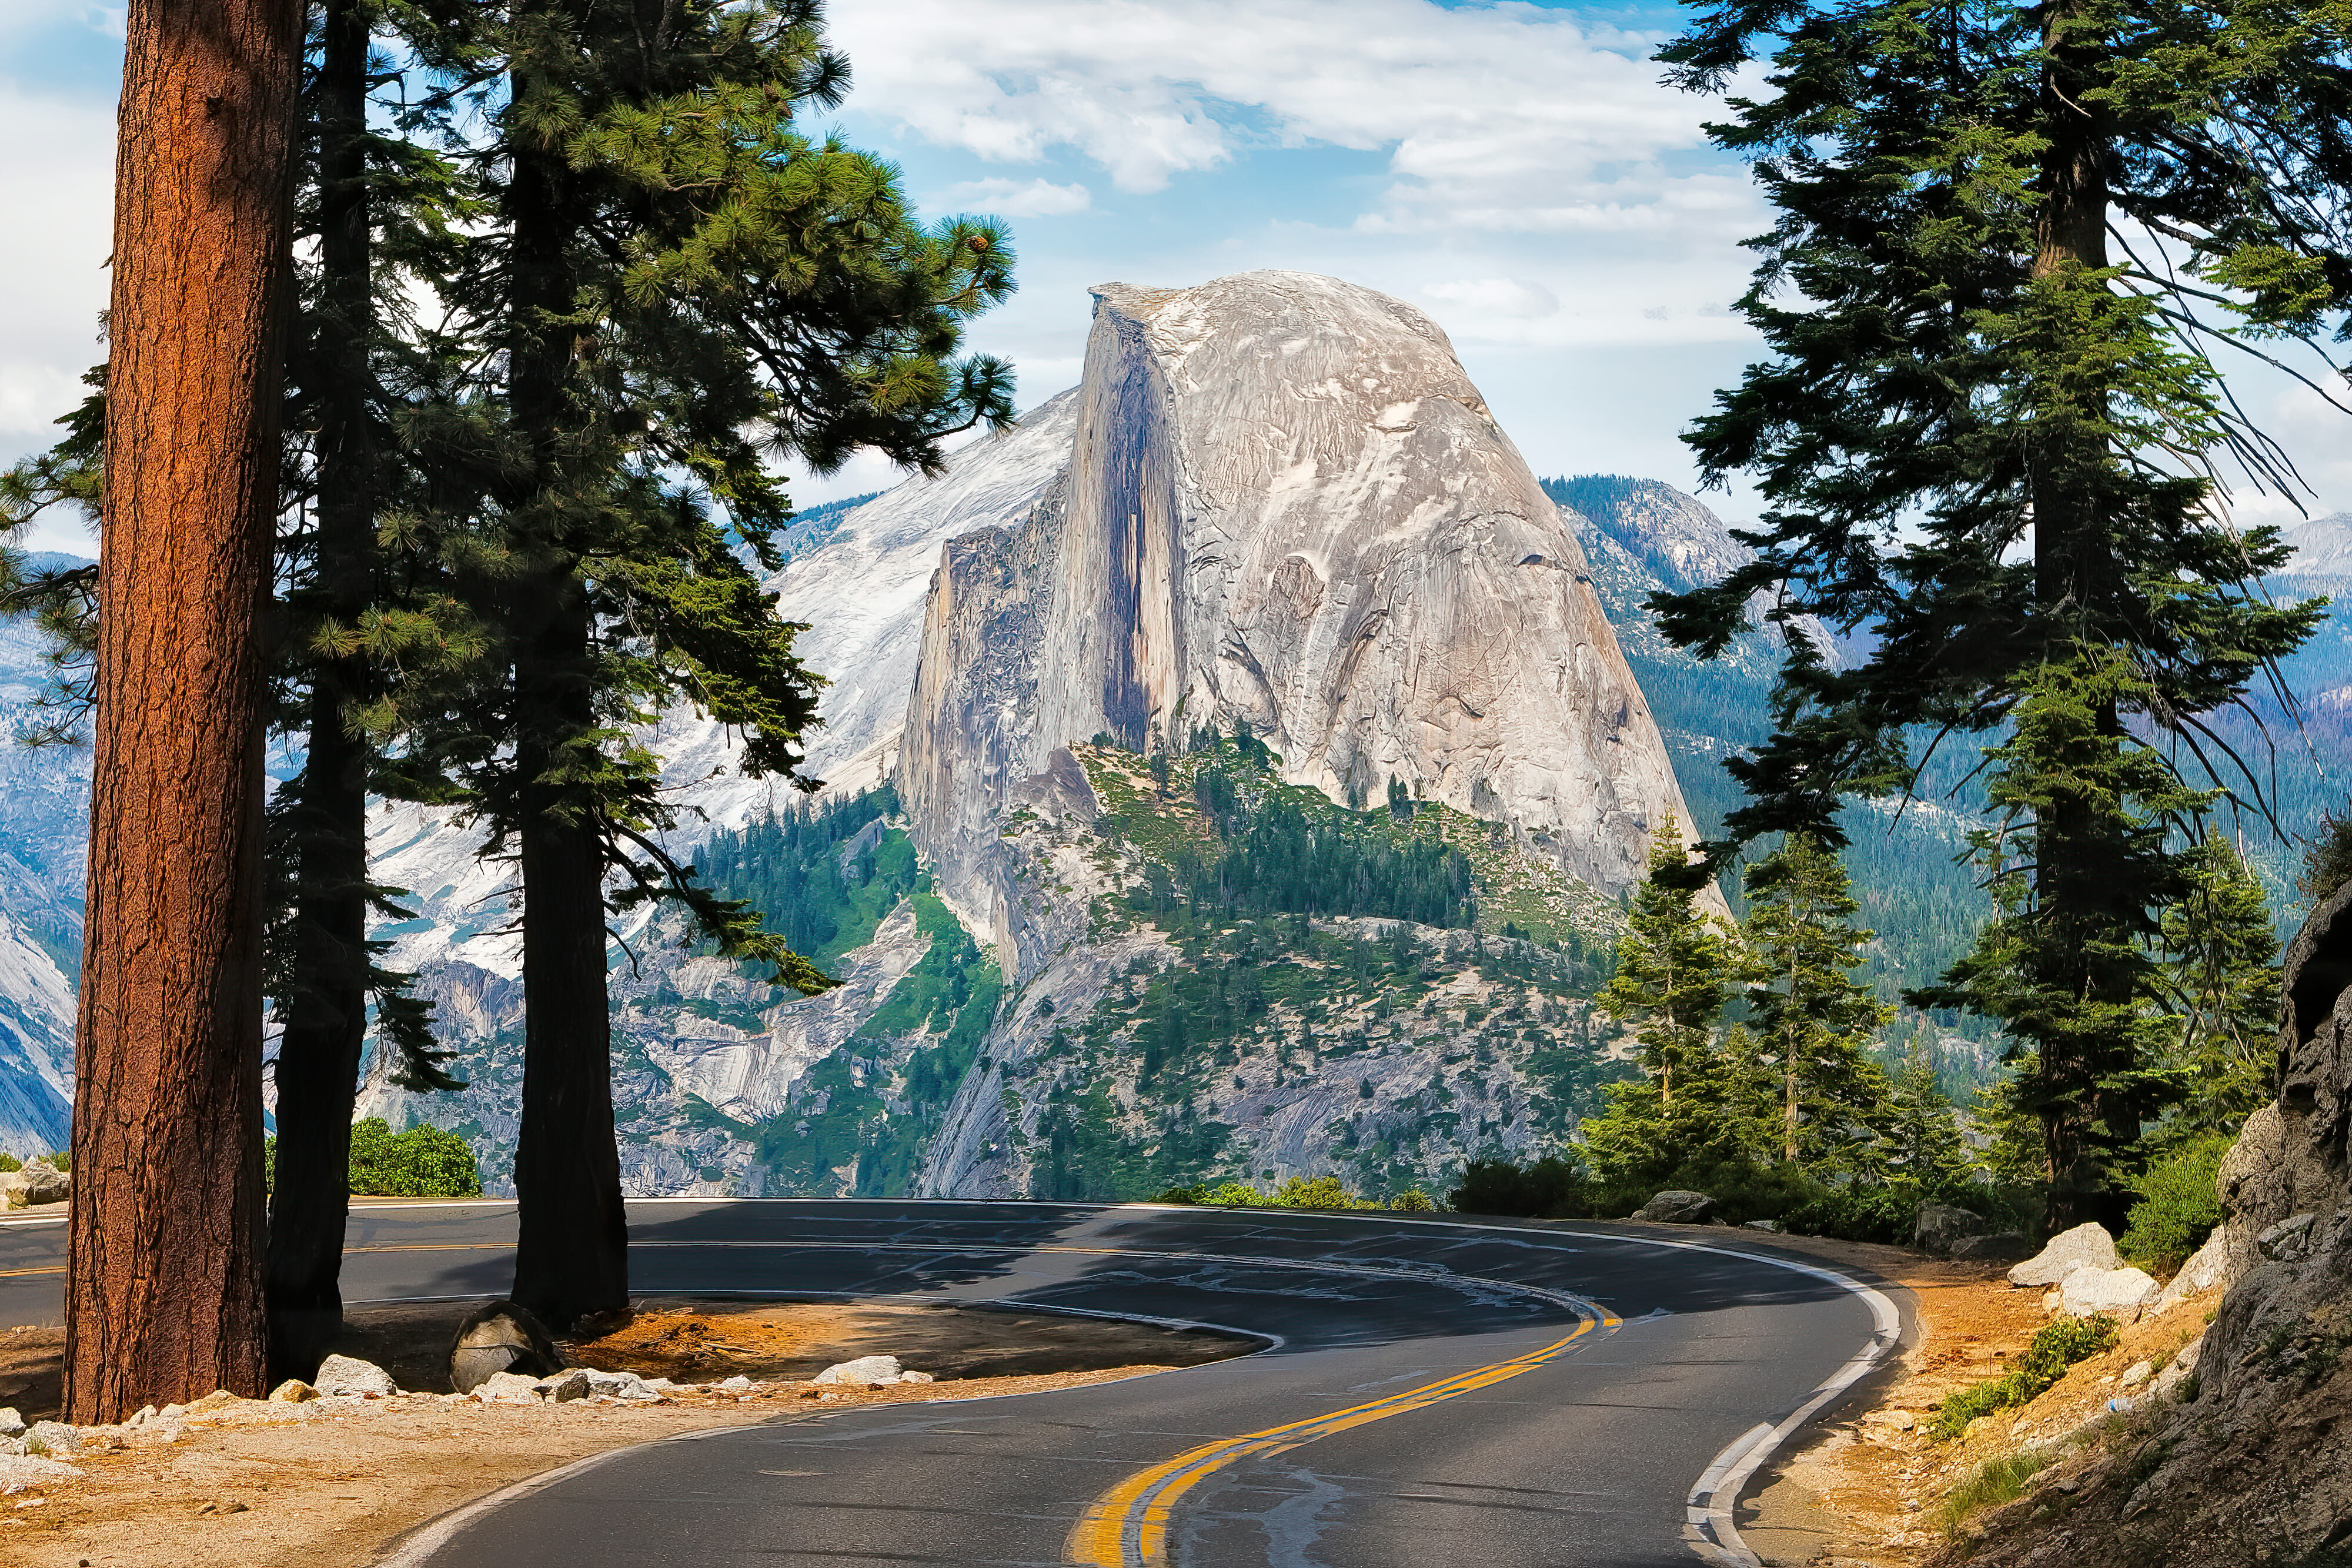 The road leading to Glacier Point in Yosemite National Park, California, USA with the Half Dome in the background